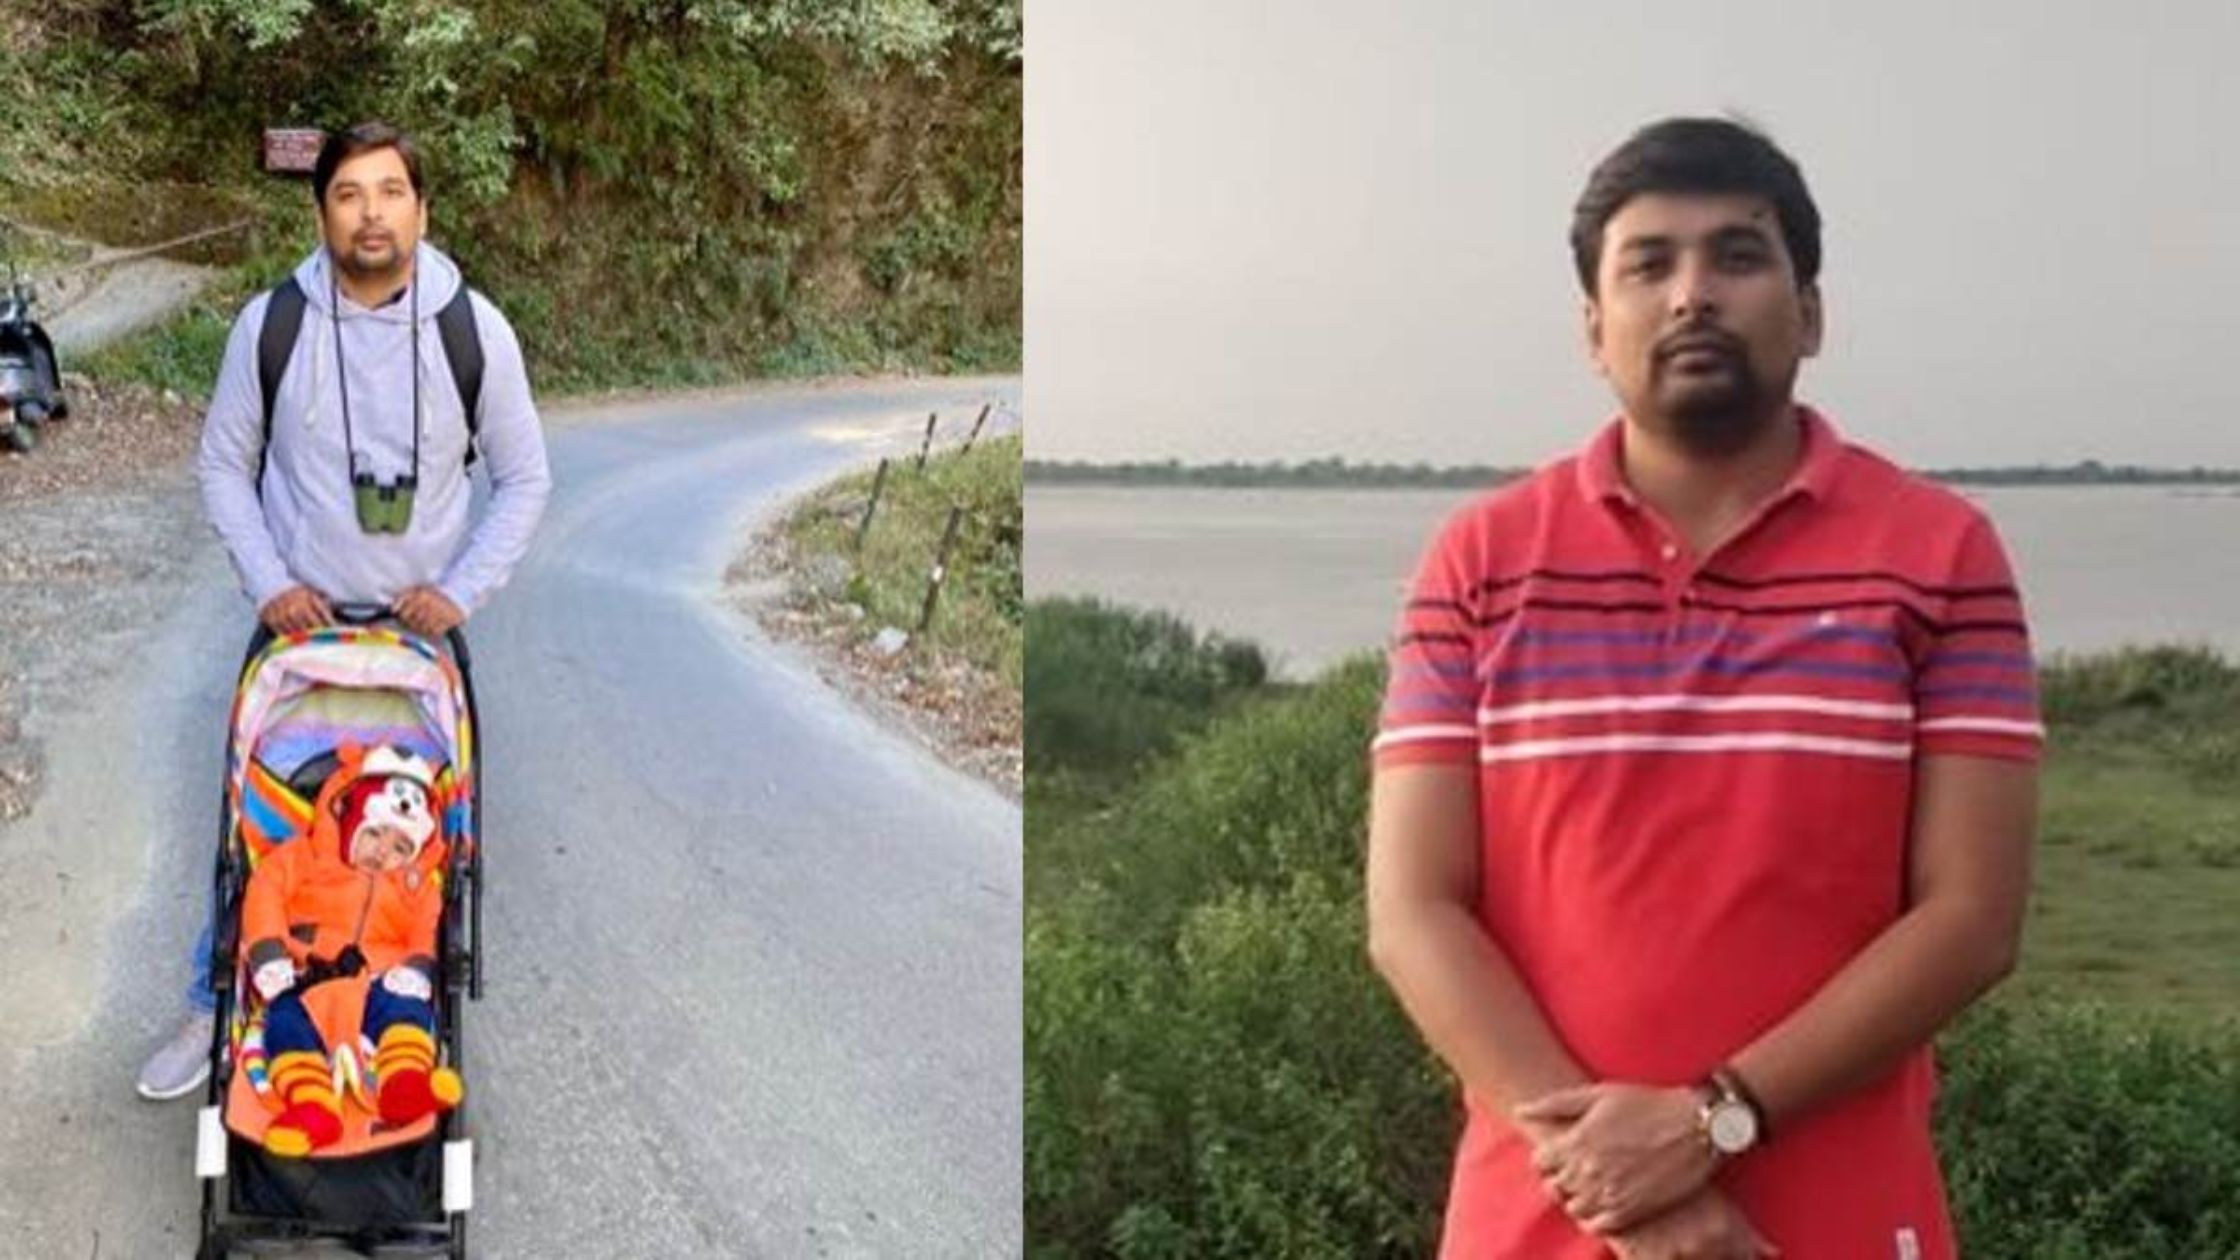 ias abhishek anand who came out from bihar changed the picture of bareilly